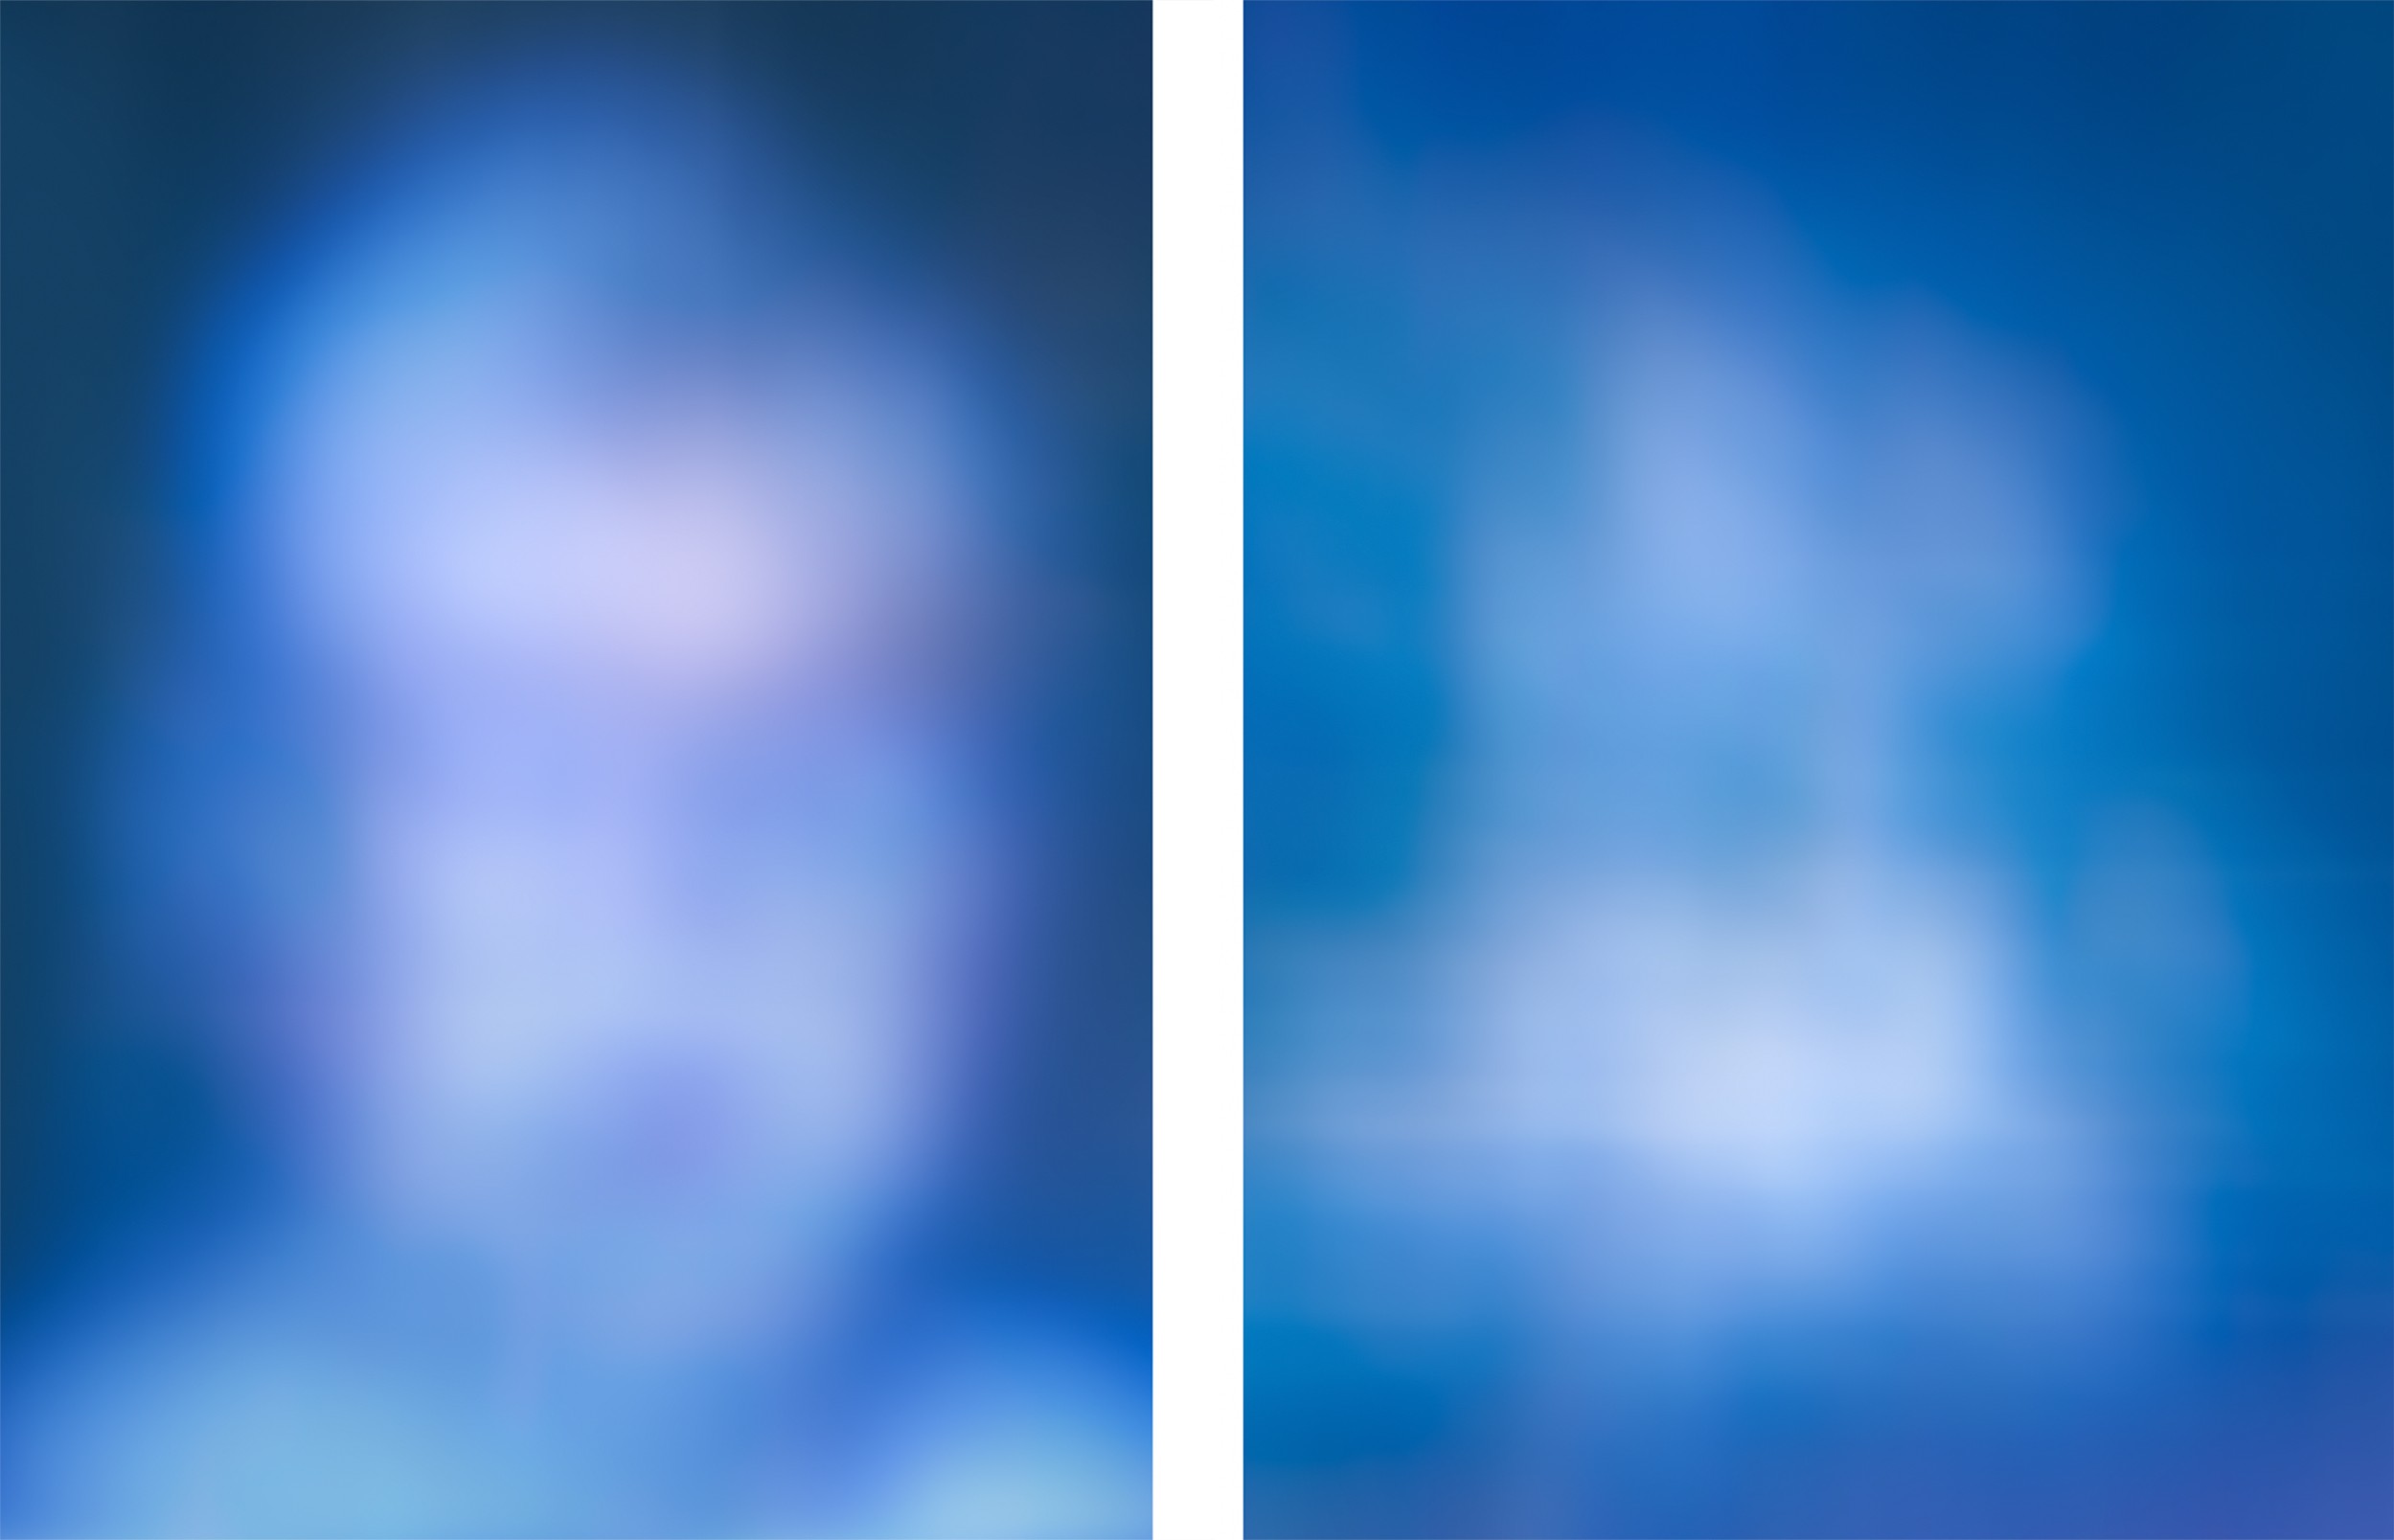 blurry female portrait next to blue color field with white snow